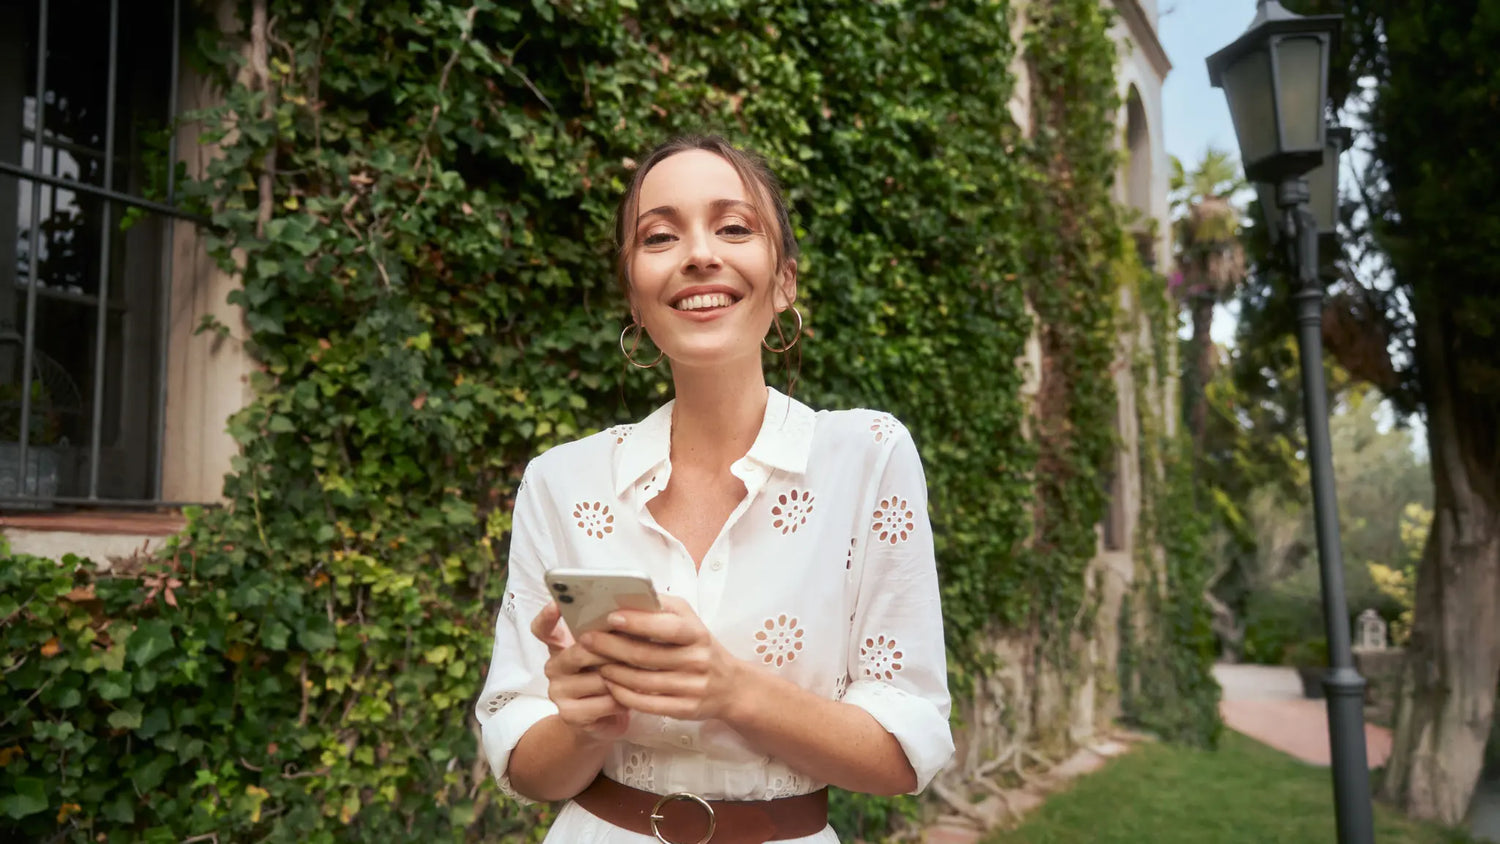 Woman smiling while texting on the phone